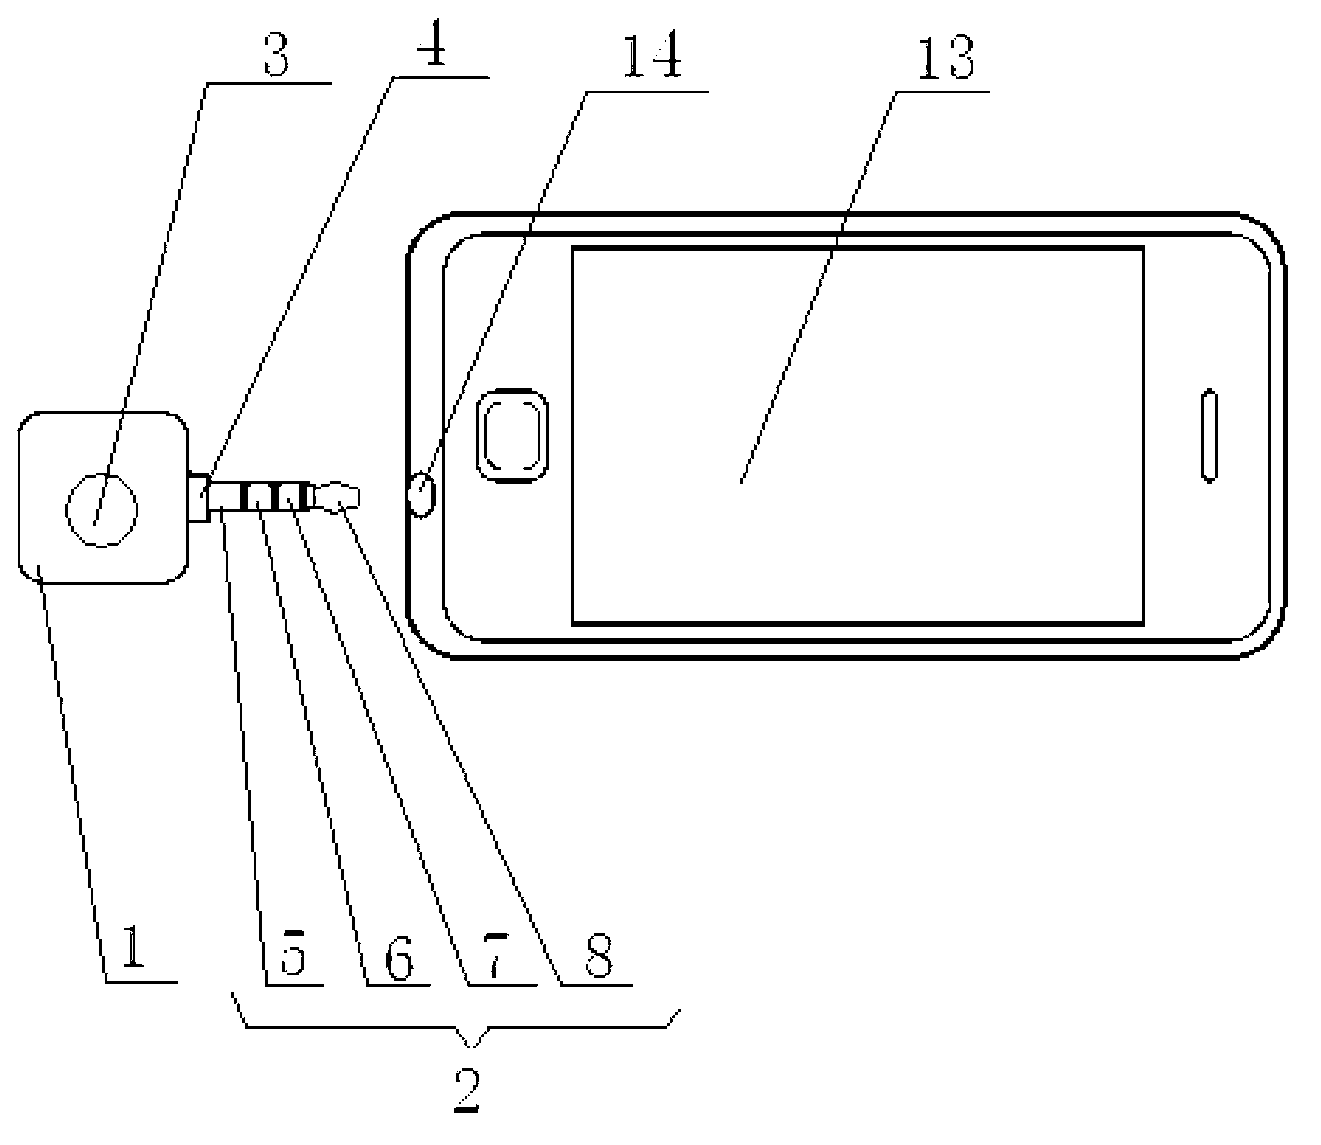 Usbkey of cellphone identity authentication terminal and application of Usbkey